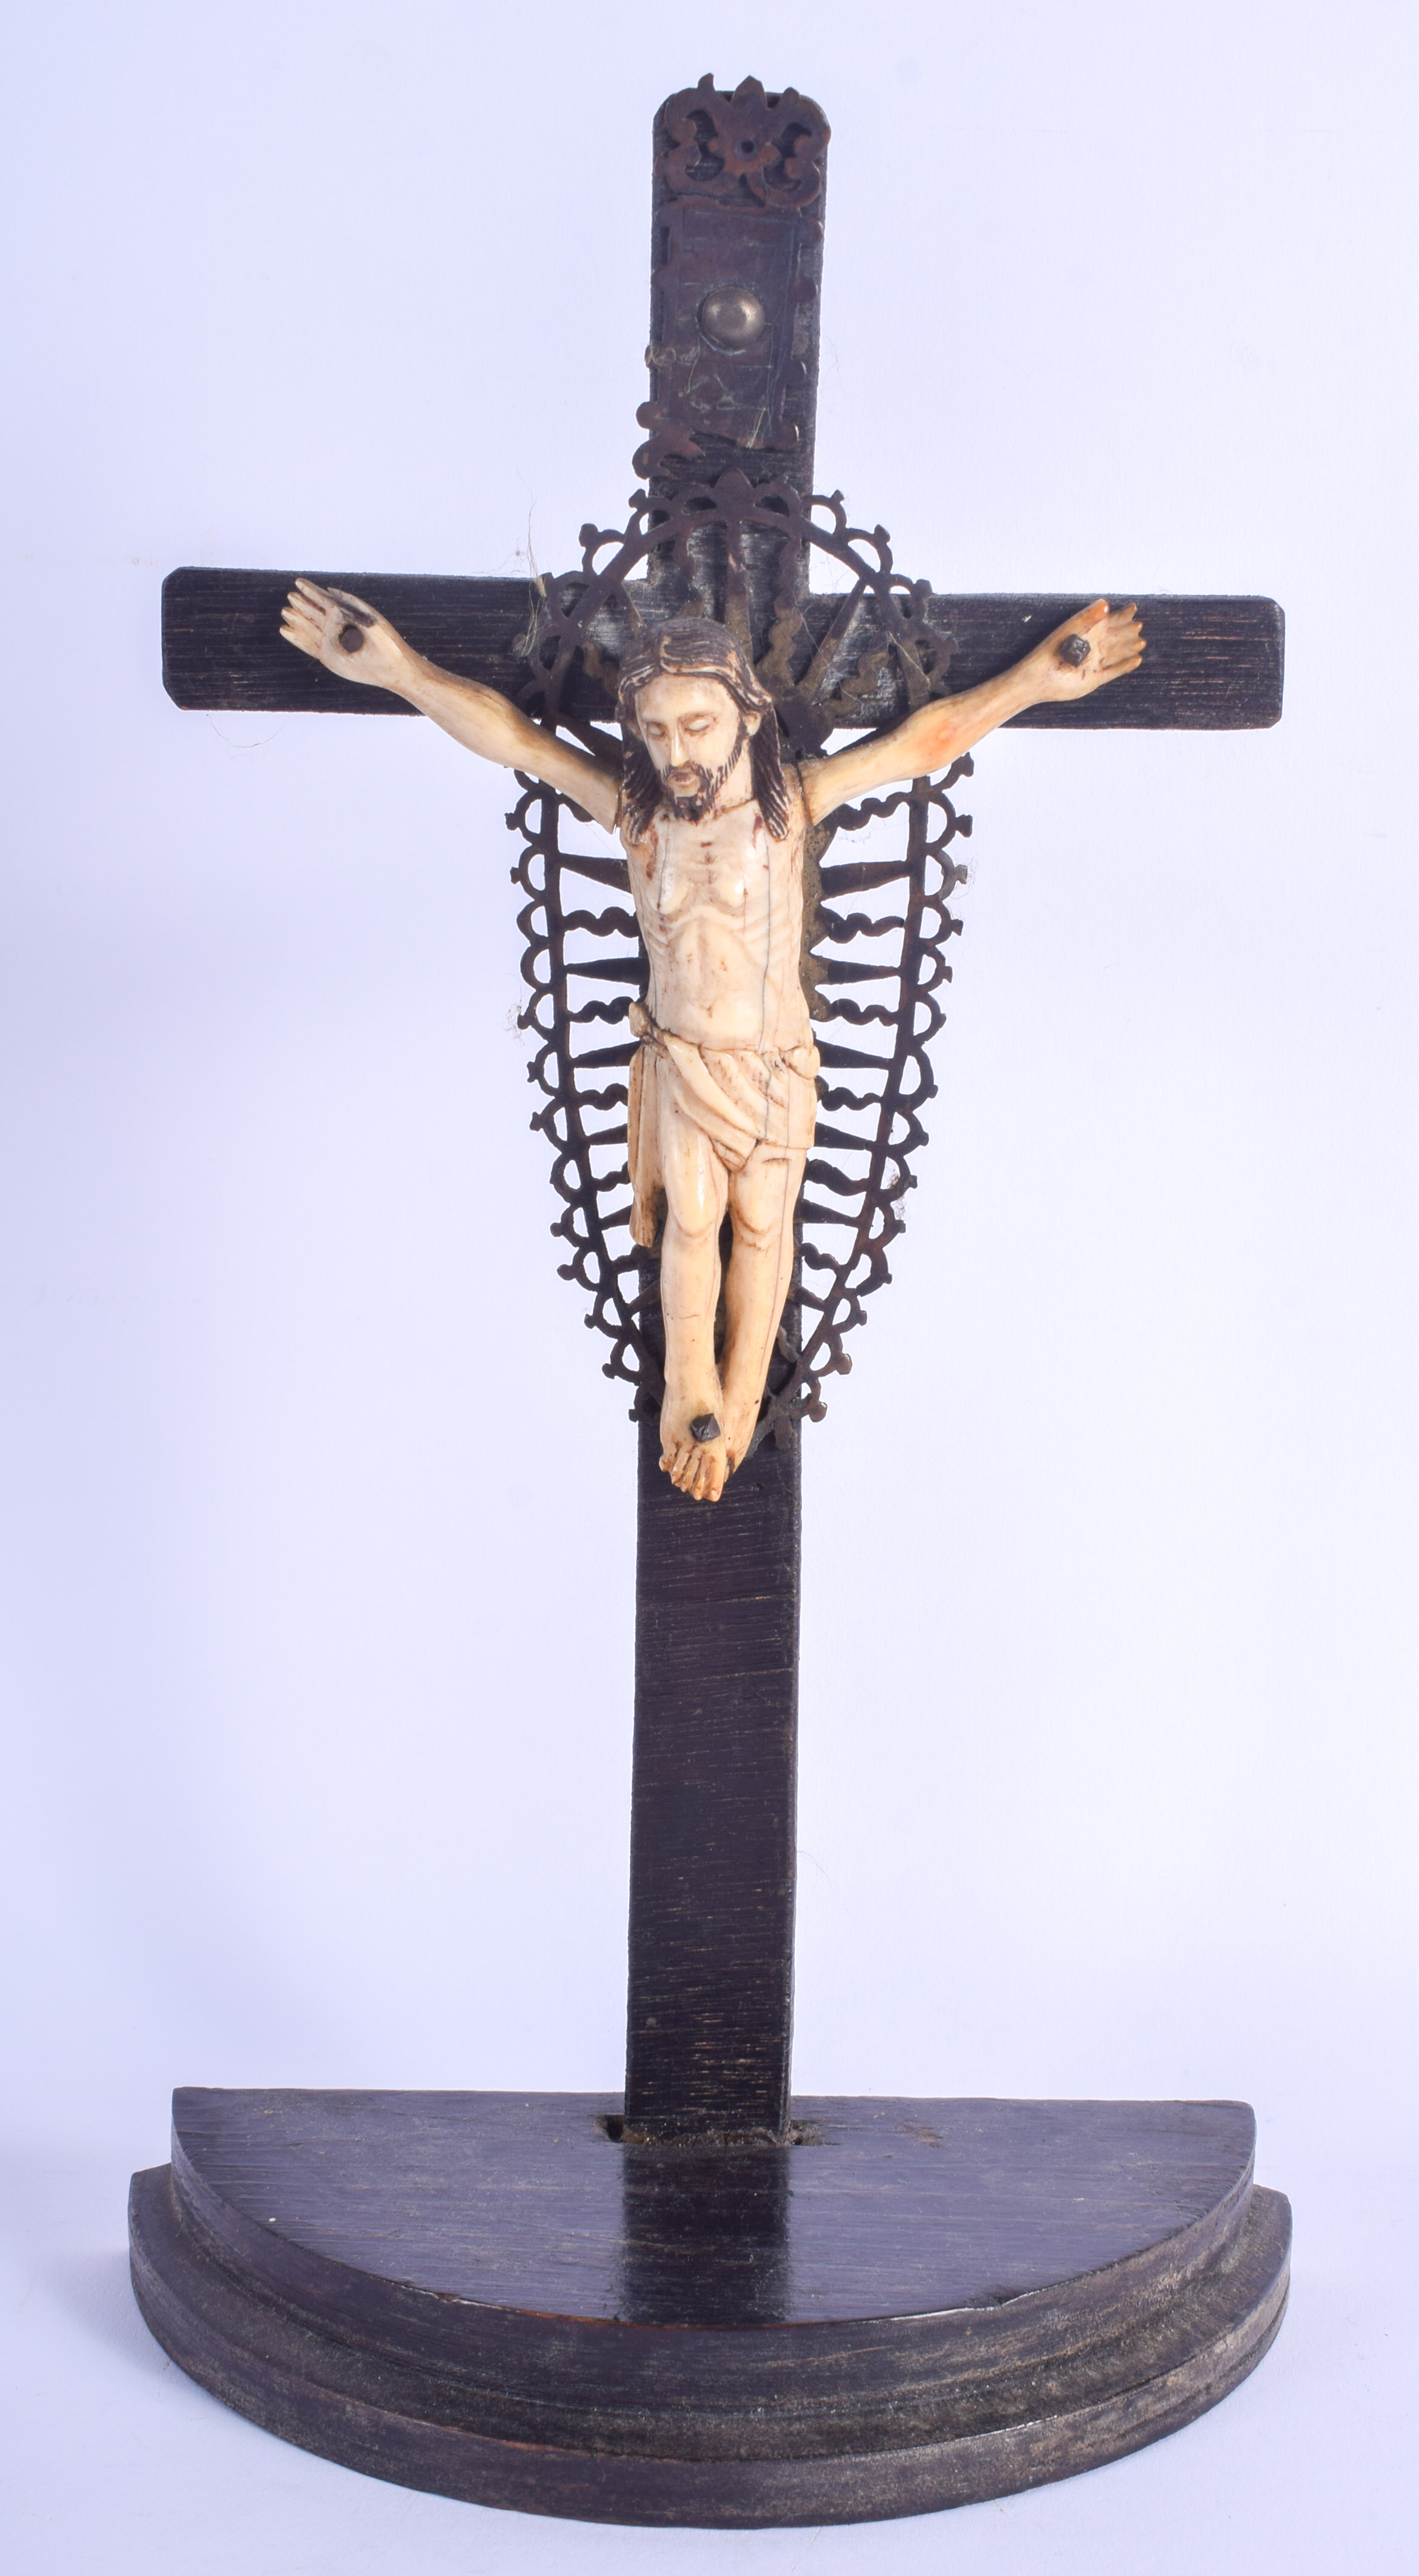 AN 18TH CENTURY INDO PORTUGUESE CARVED IVORY CRUCIFIX modelled upon the cross. Ivory 13 cm x 11 cm.